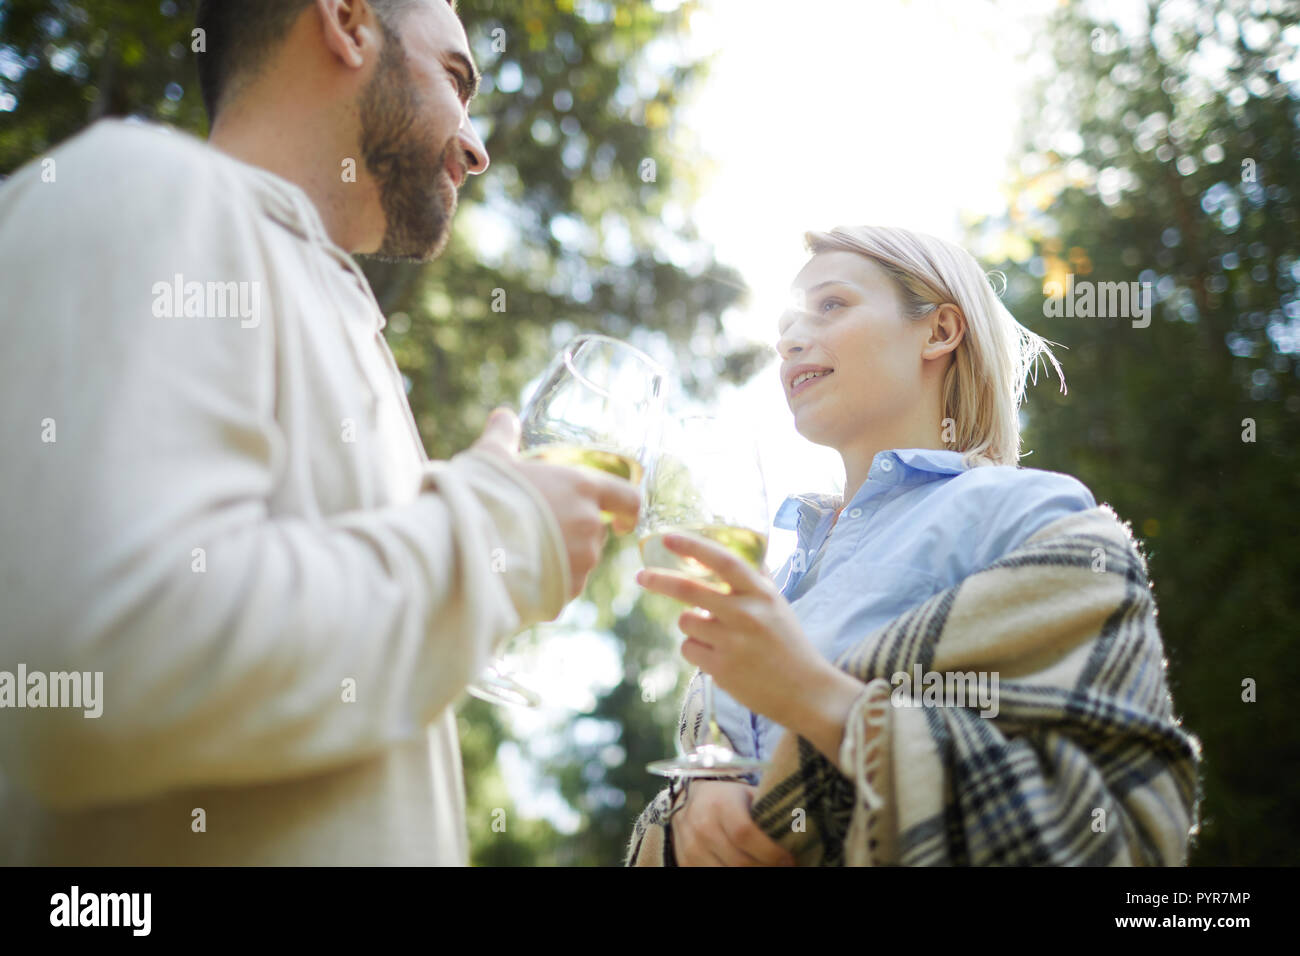 Amorous Couple Drinking Wine Banque D'Images